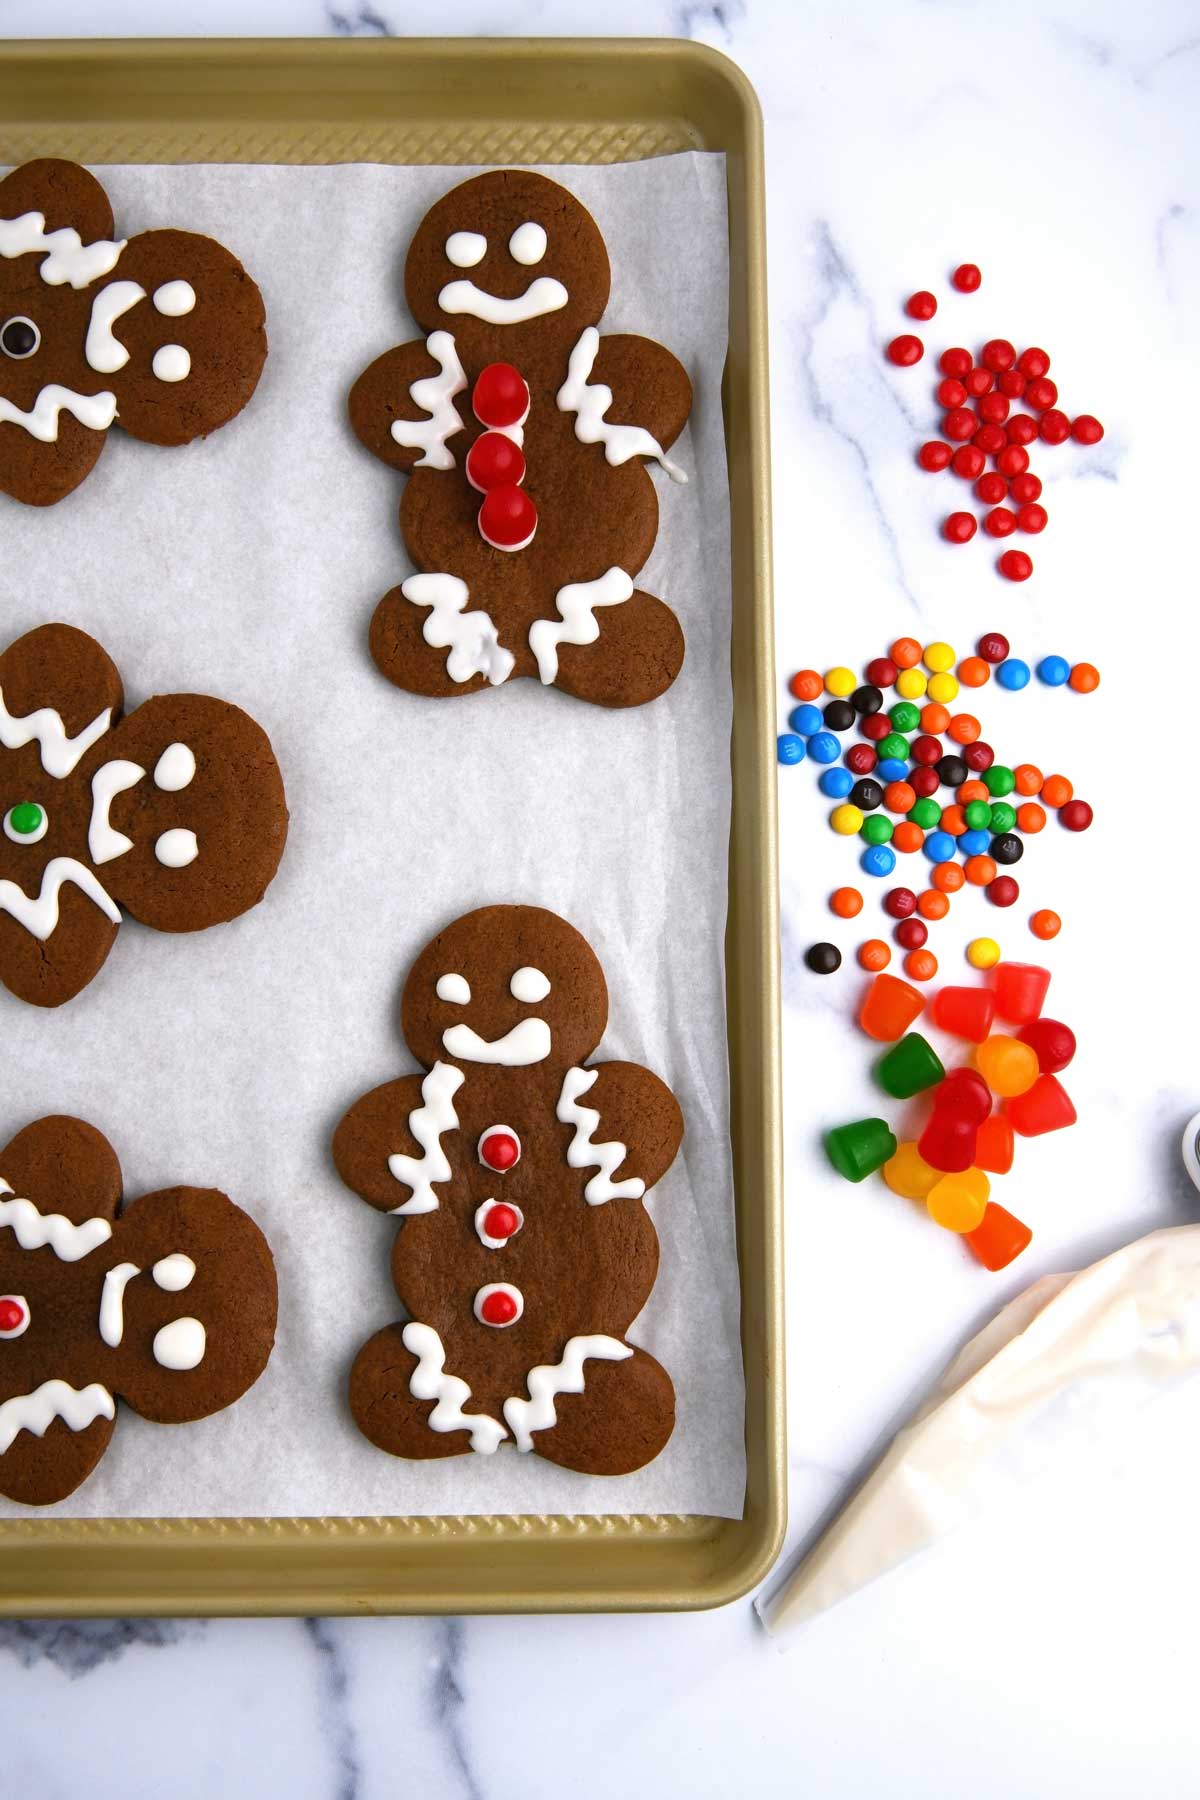 Photo of decorated gingerbread men cookies on a baking sheet with a frosting bag filled with cookie icing and assorted candy decorations on a marble countertop.